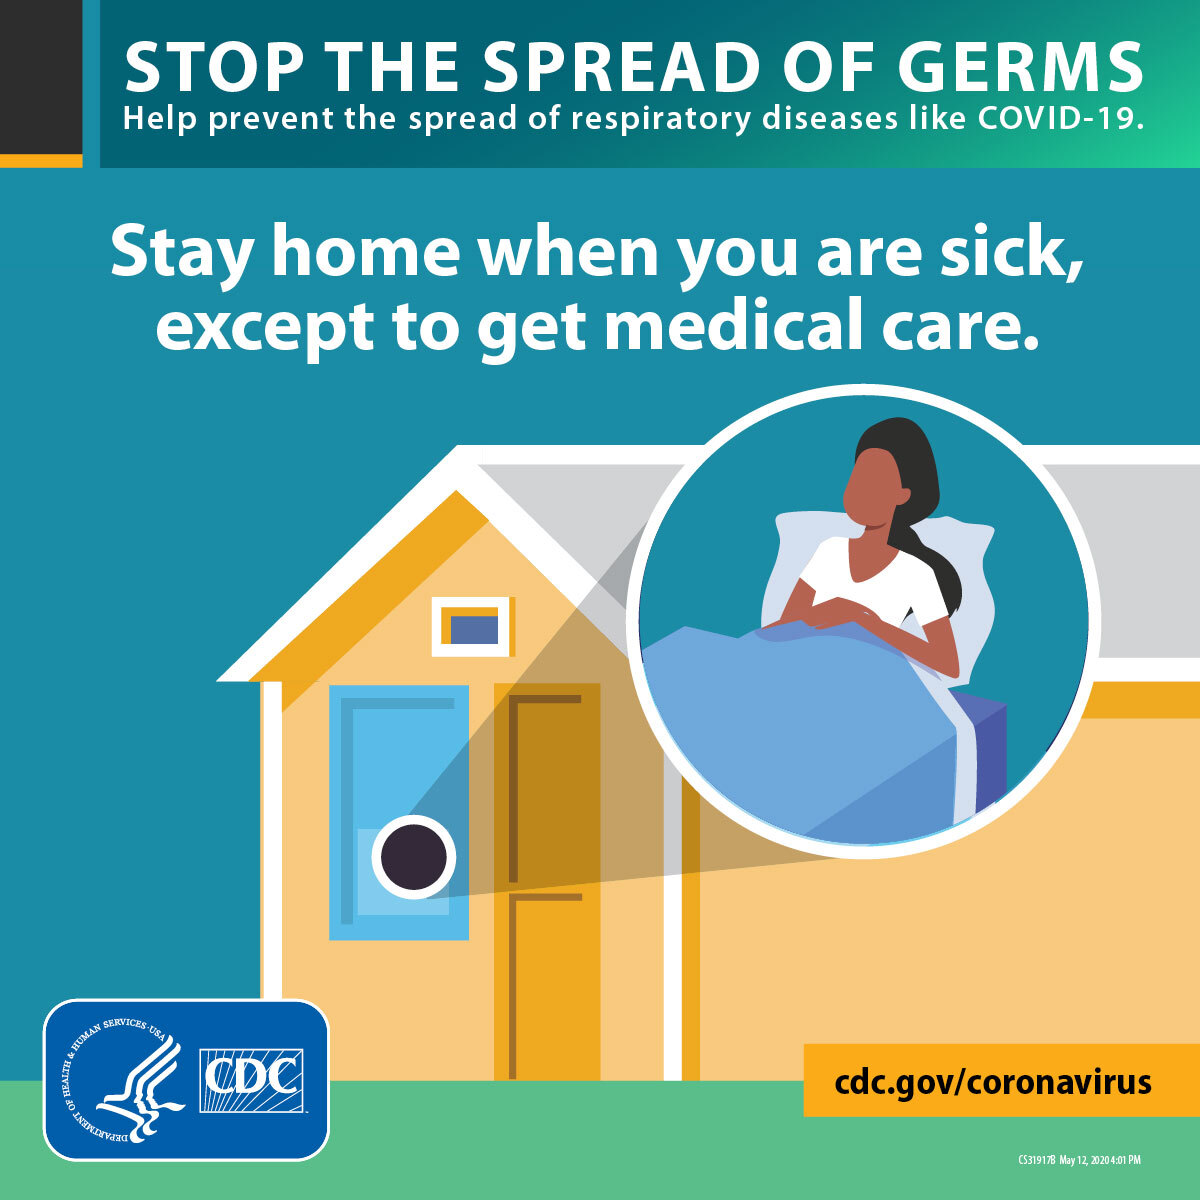 Stop the spread of germs: stay home when you are sick.